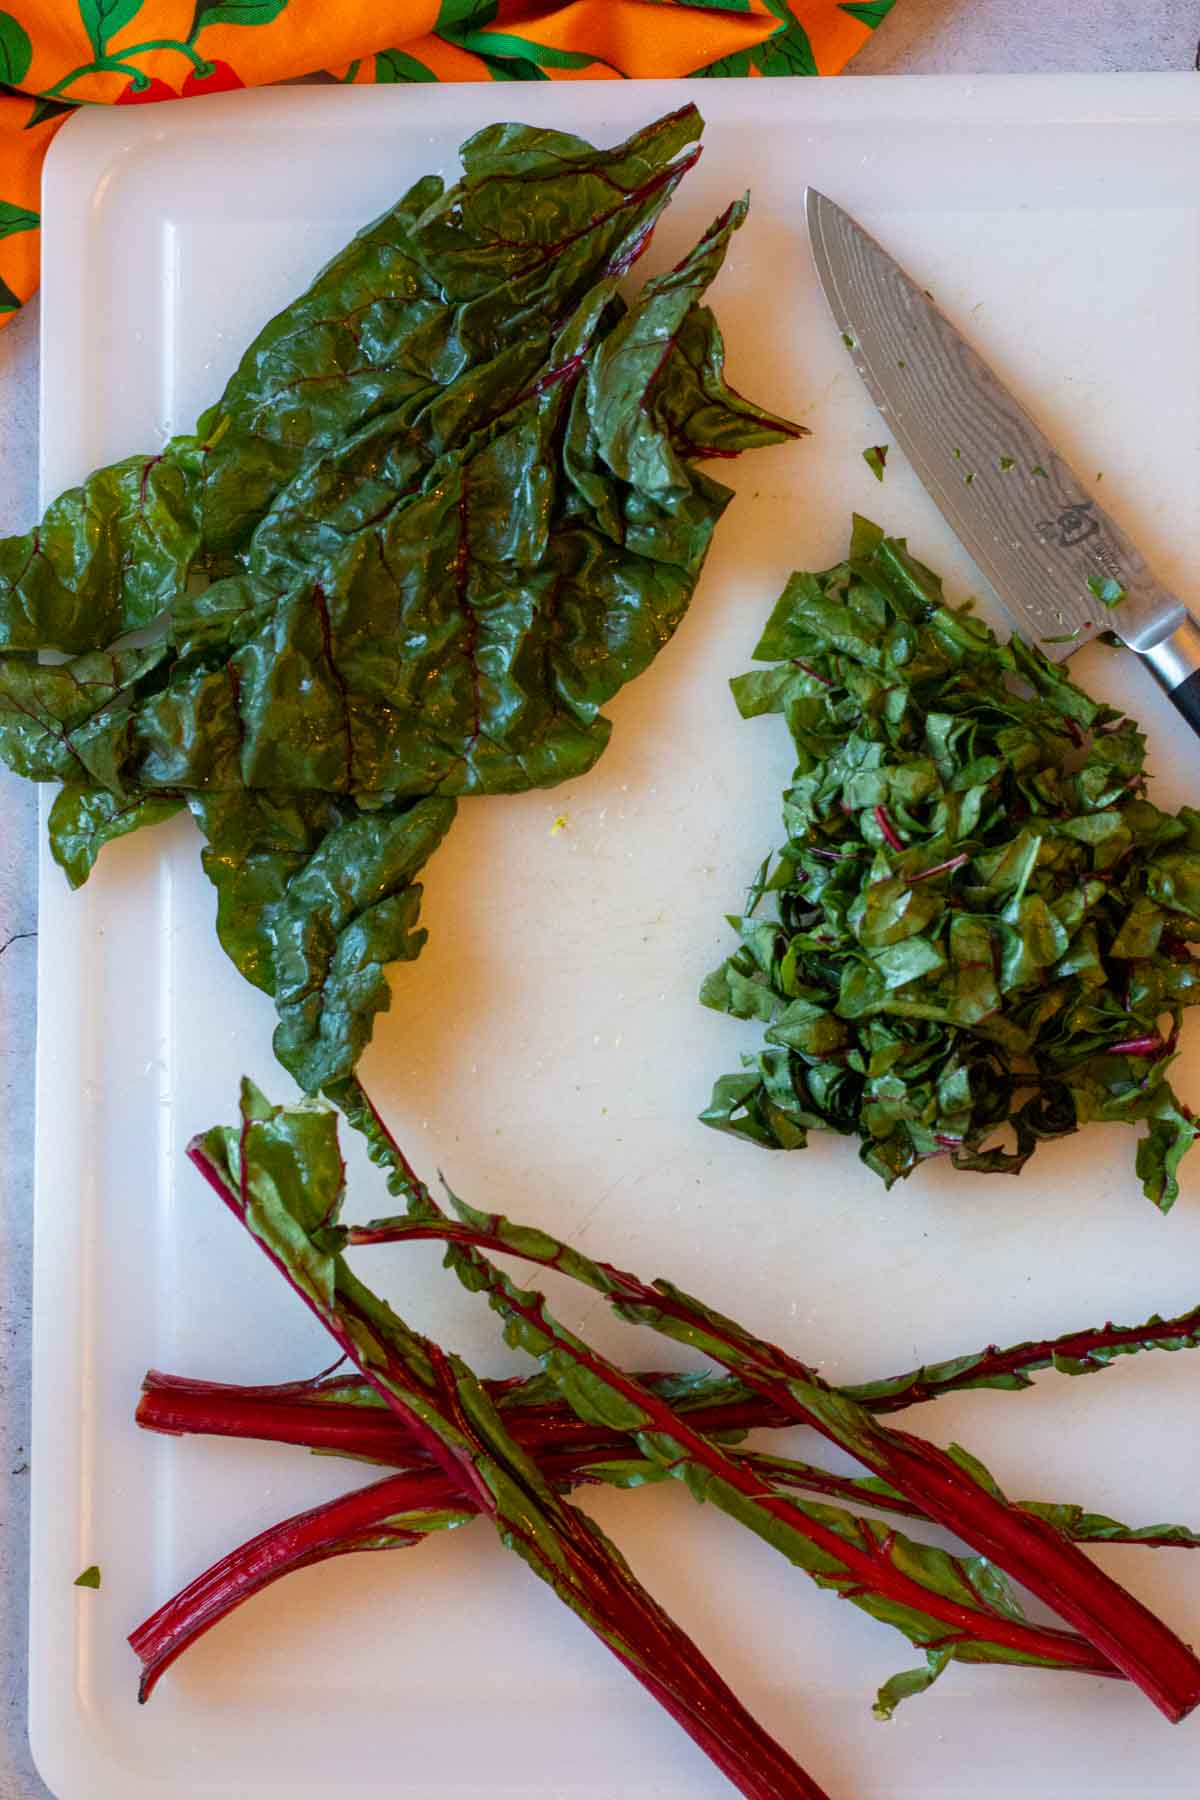 Removing leaves from Swiss Chard.